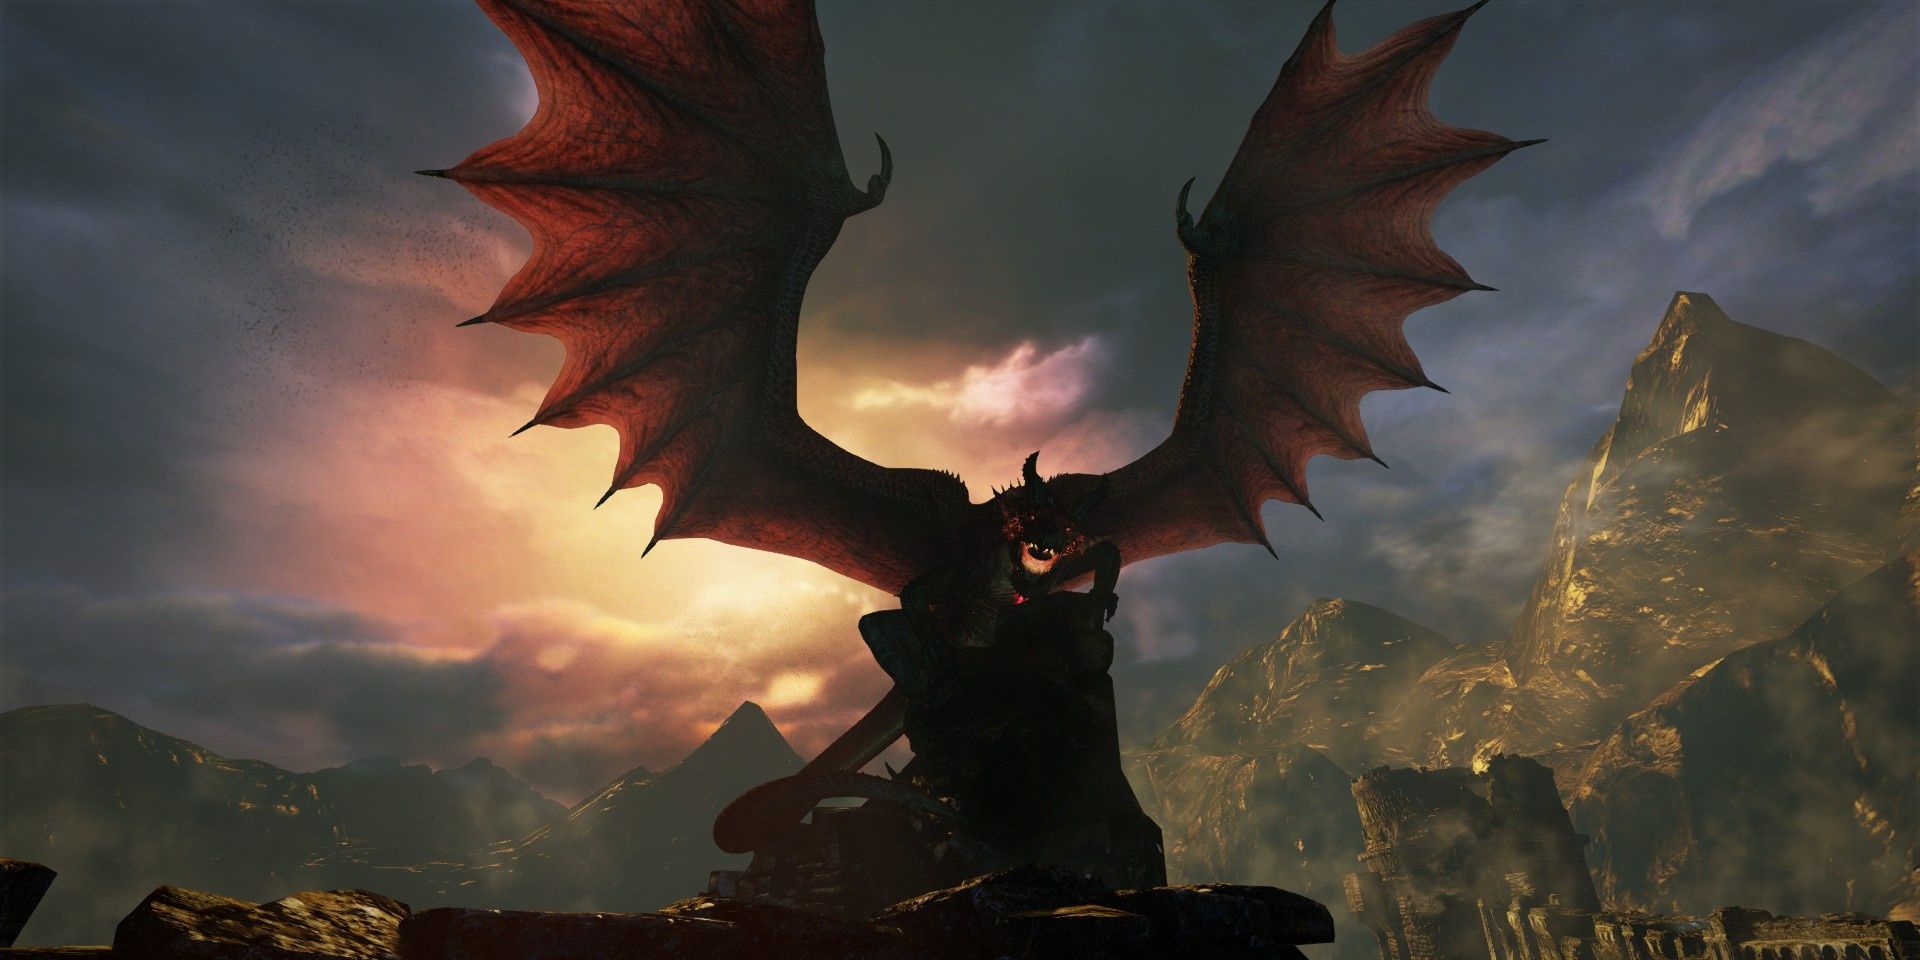 Grigori from Dragon's Dogma with his wings outstretched